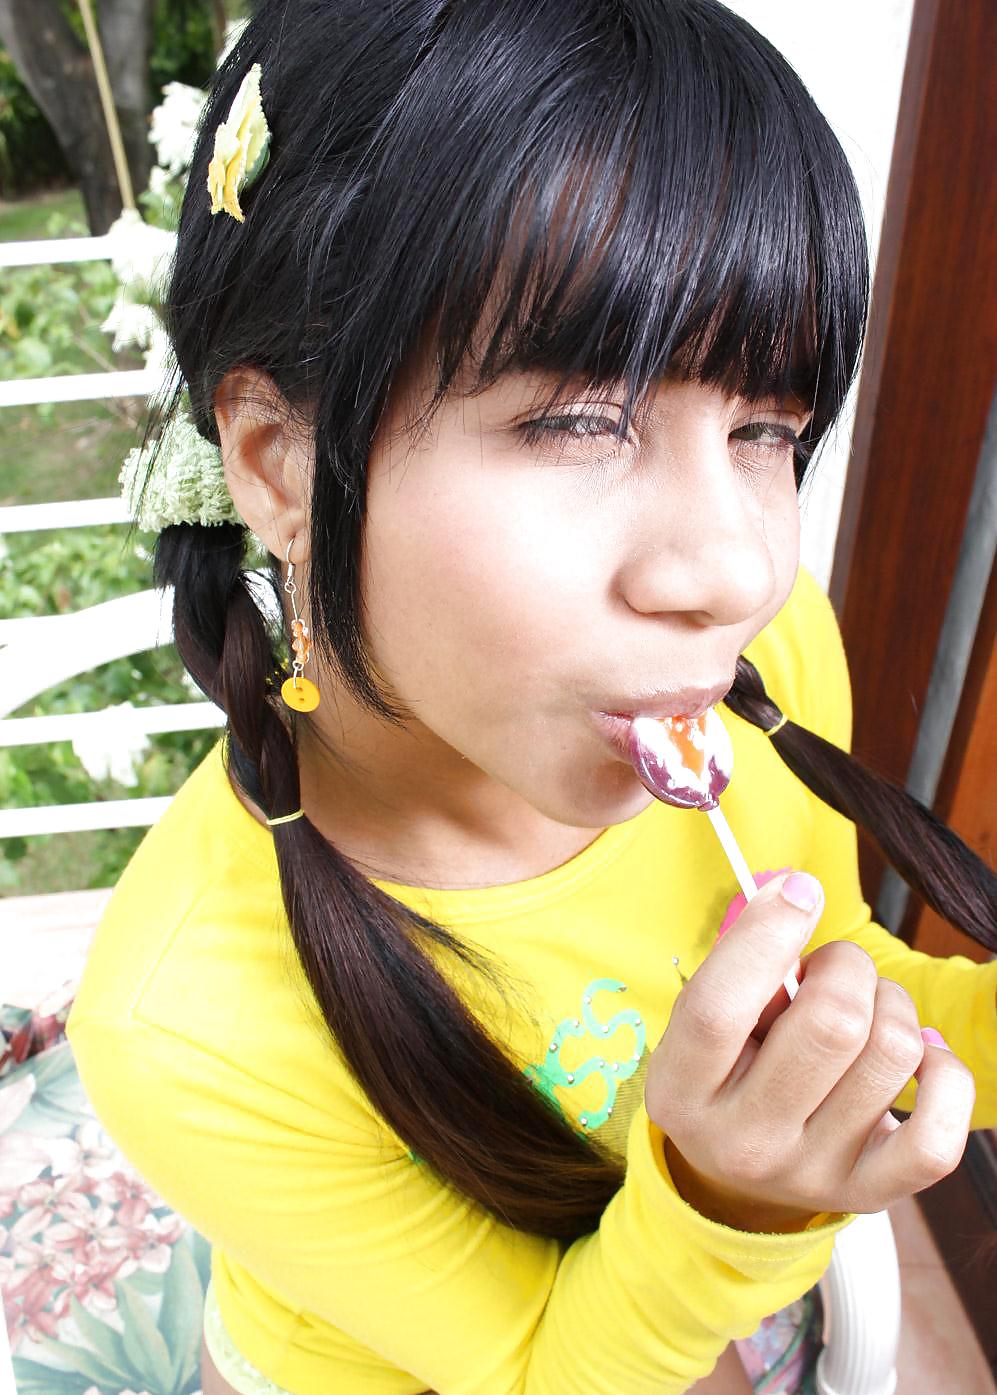 Charming Tobie - Licking a lollypop #3789900